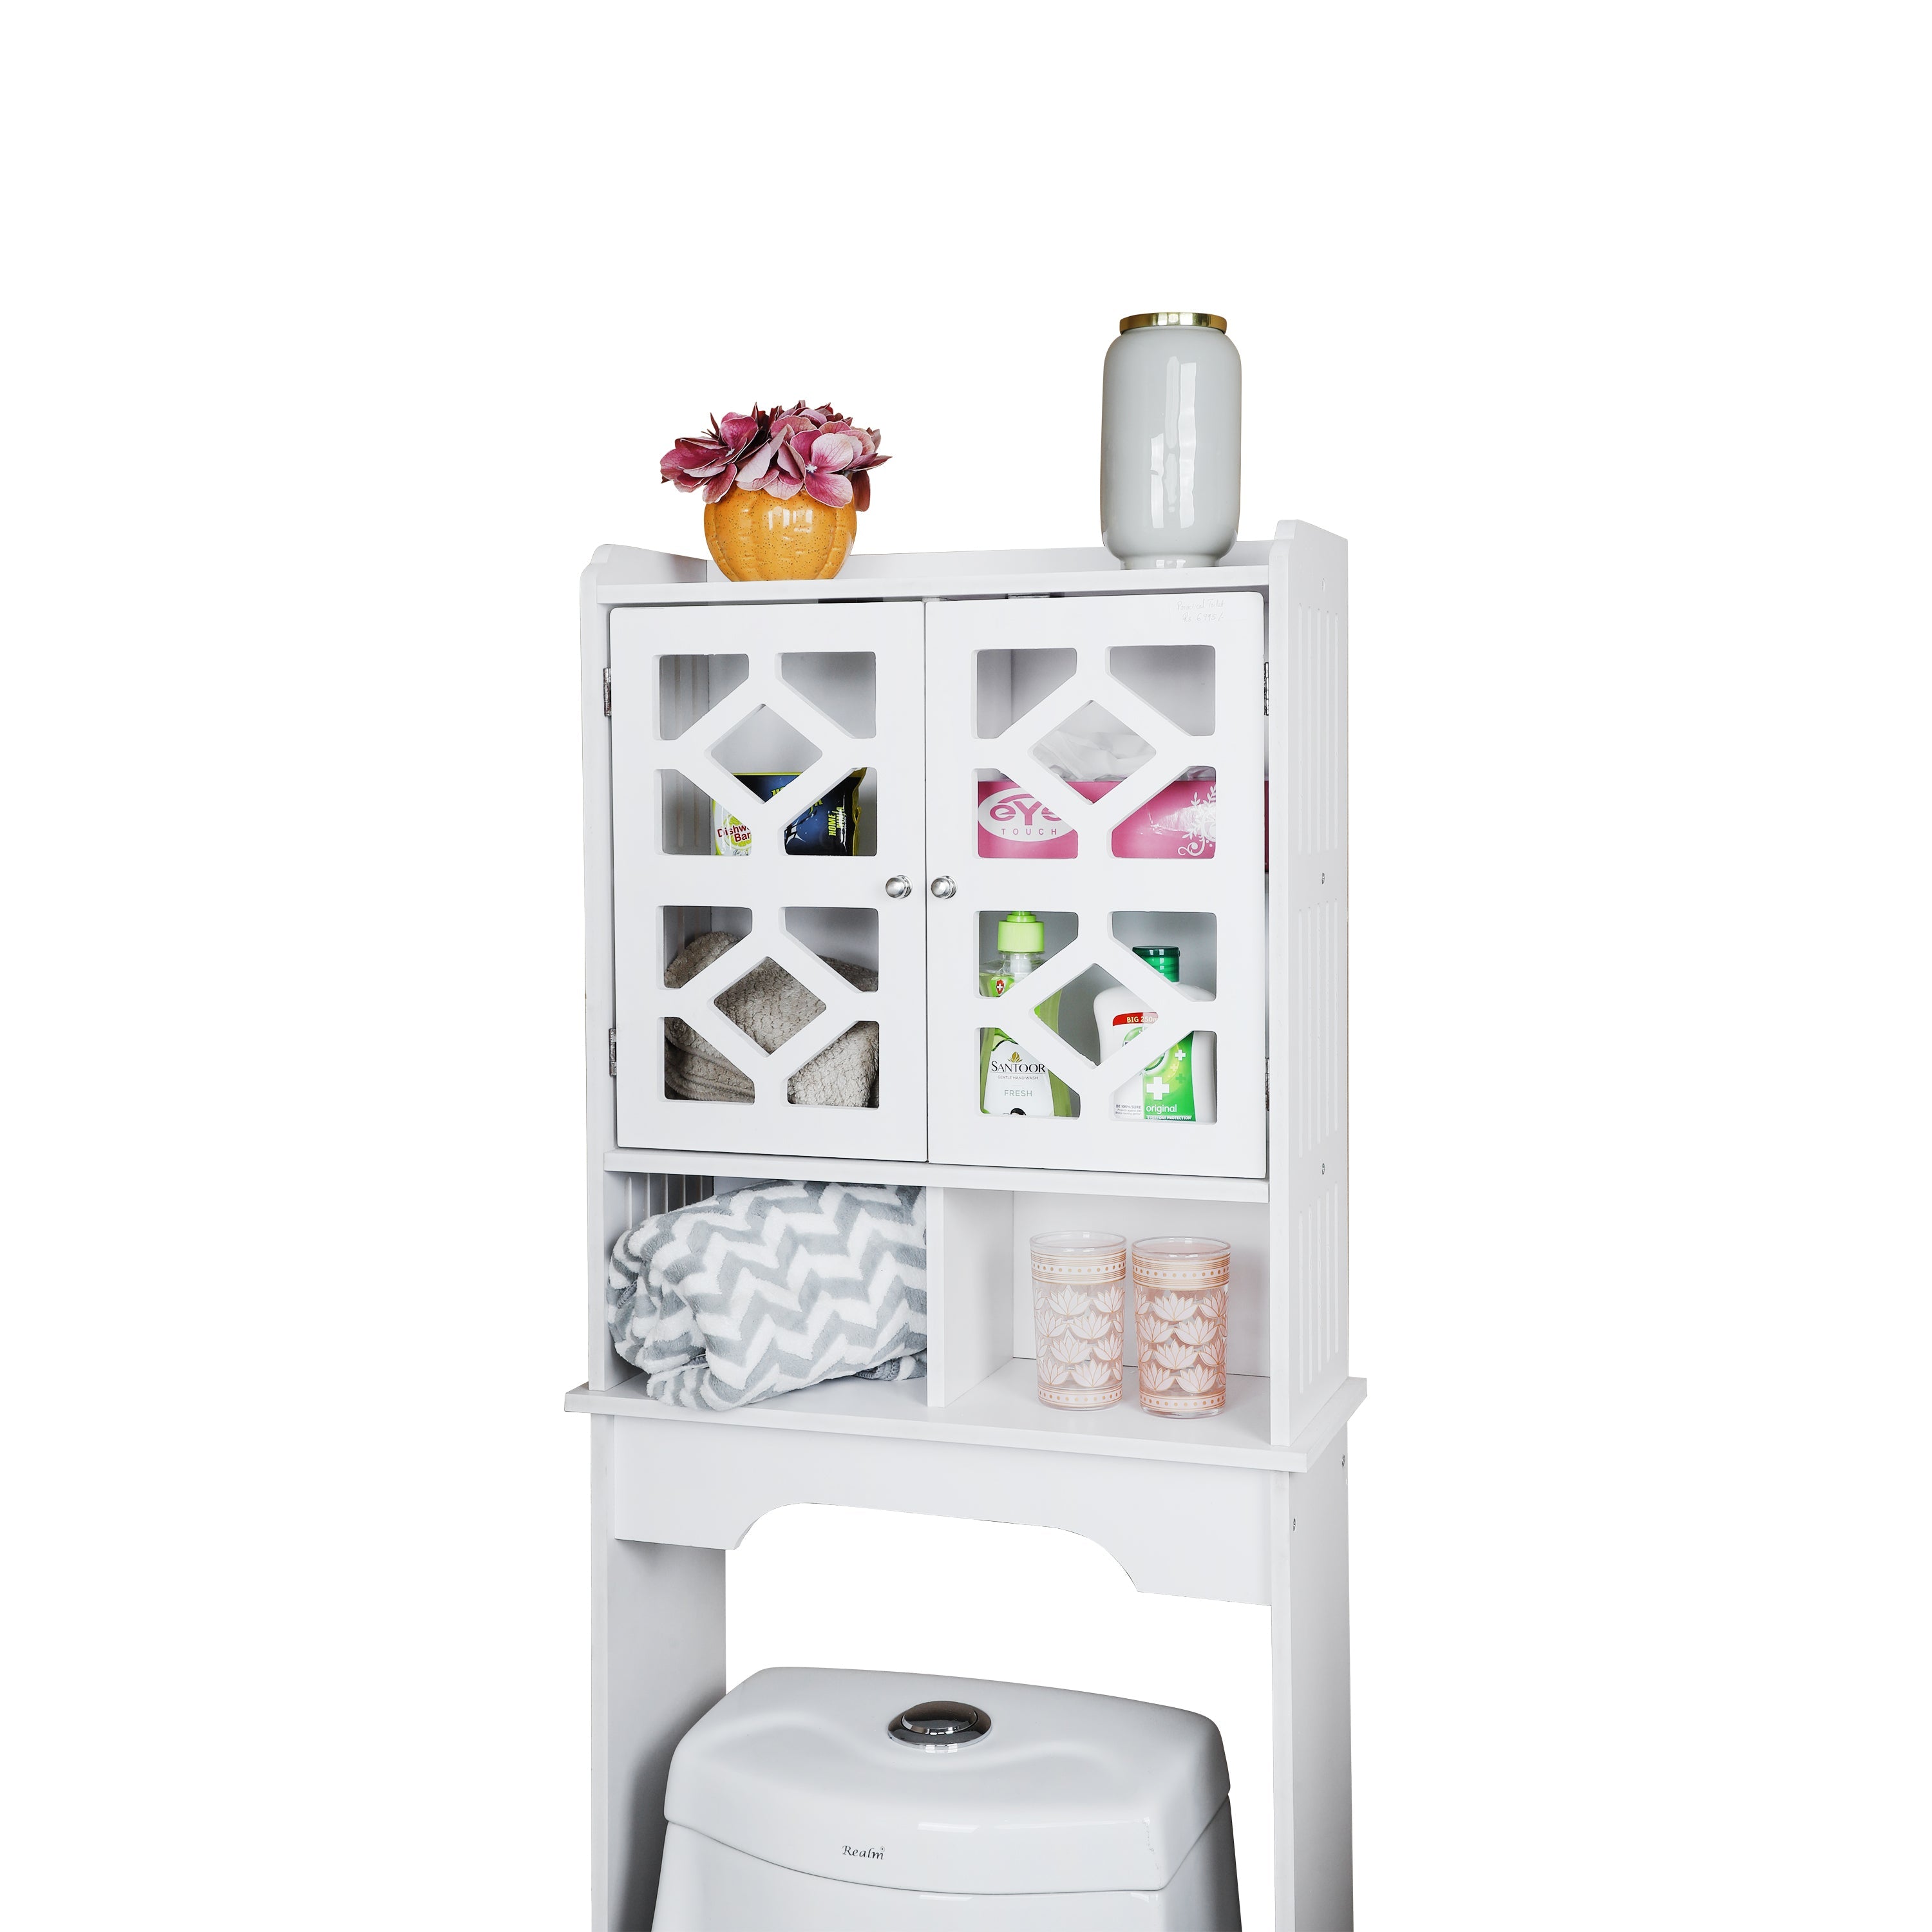 Practical Toilet Storage Shelf And Commode Cabinet With Free Soap Dish By Miza